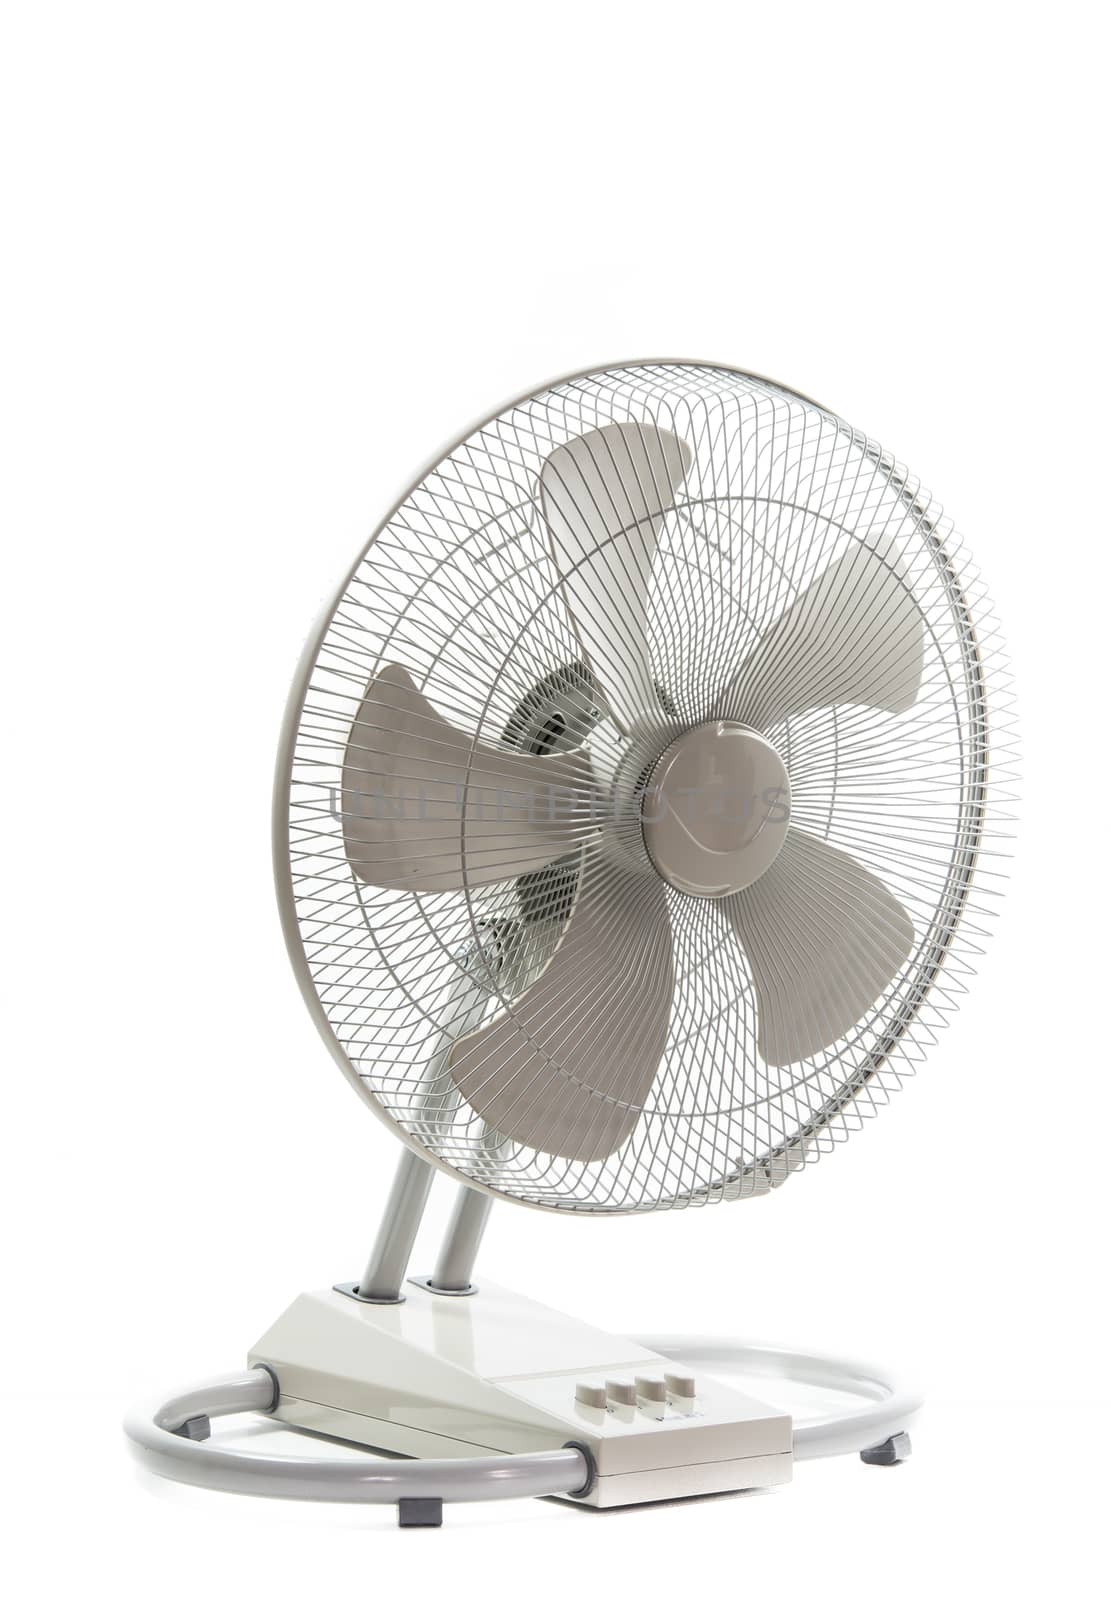 industry metal fan isolate on over white background